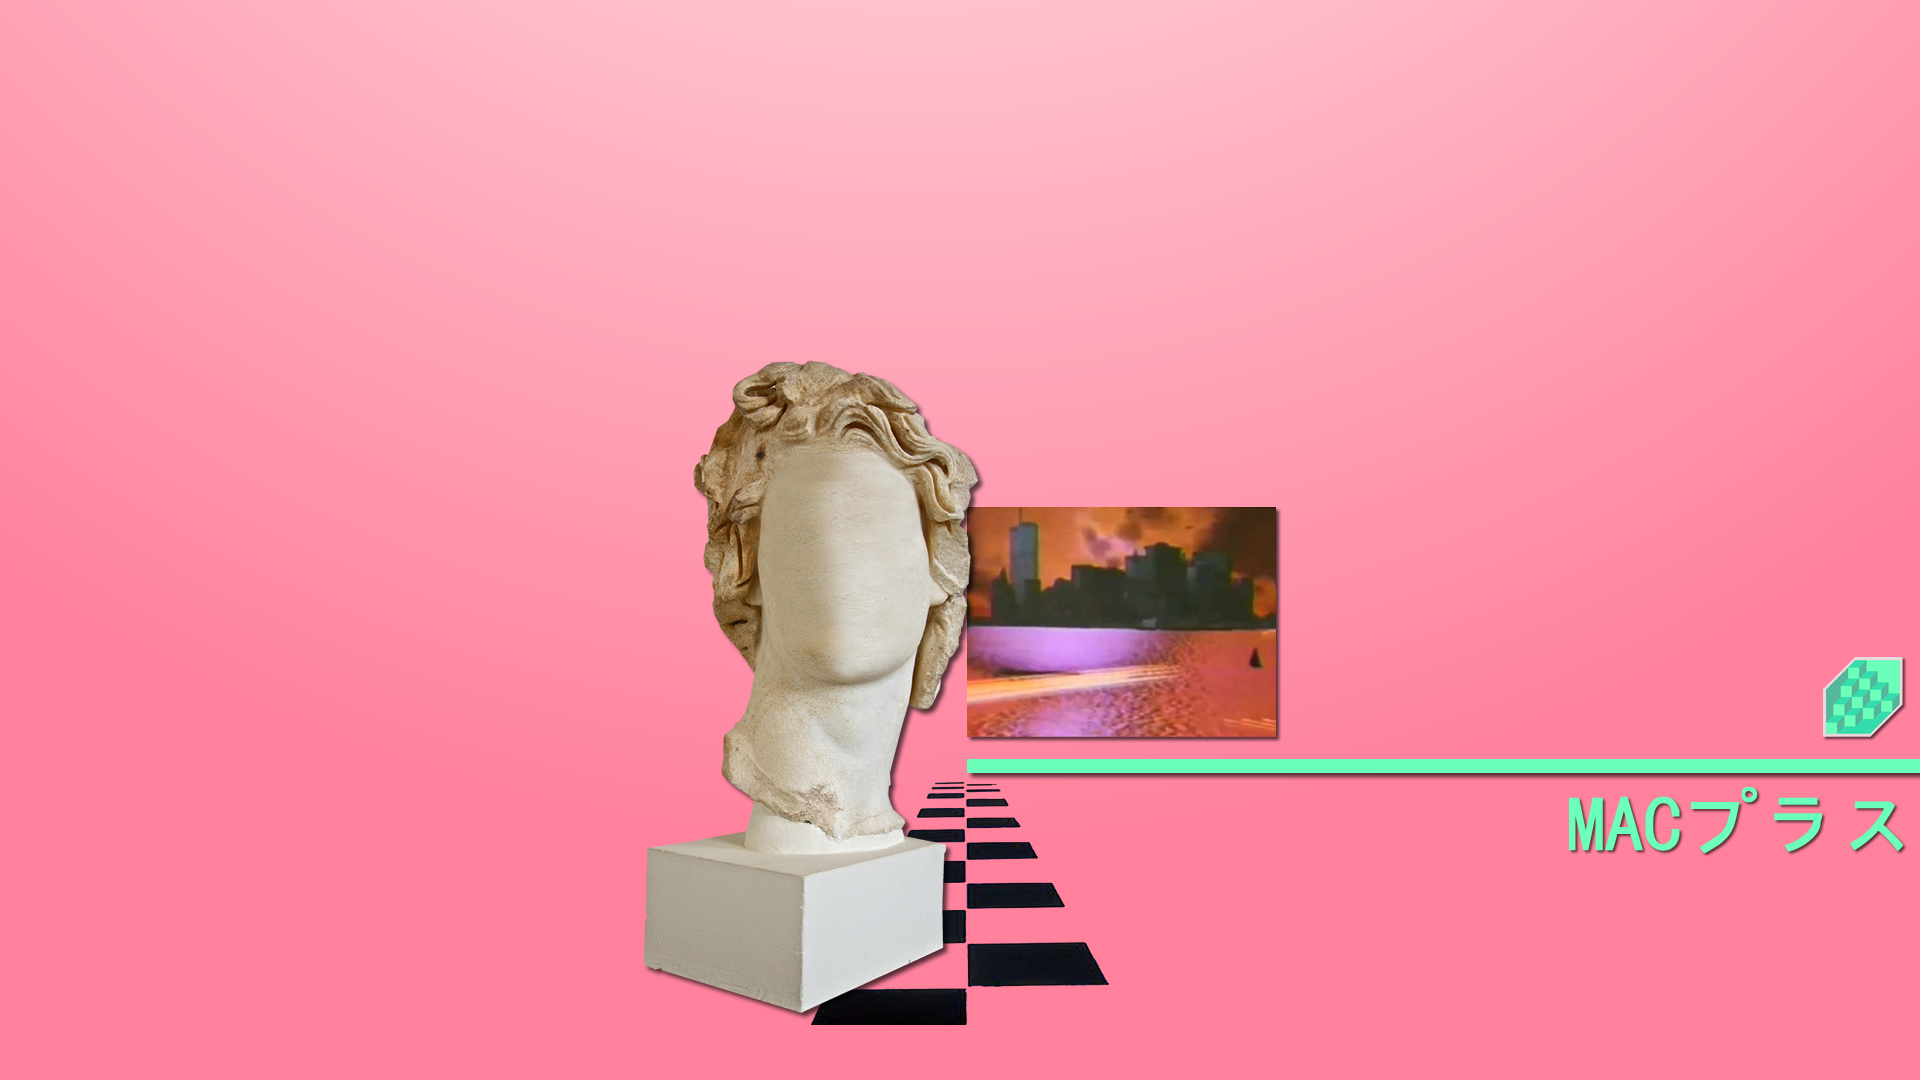 Aesthetic Vaporwave Picture At Cool Monodomo